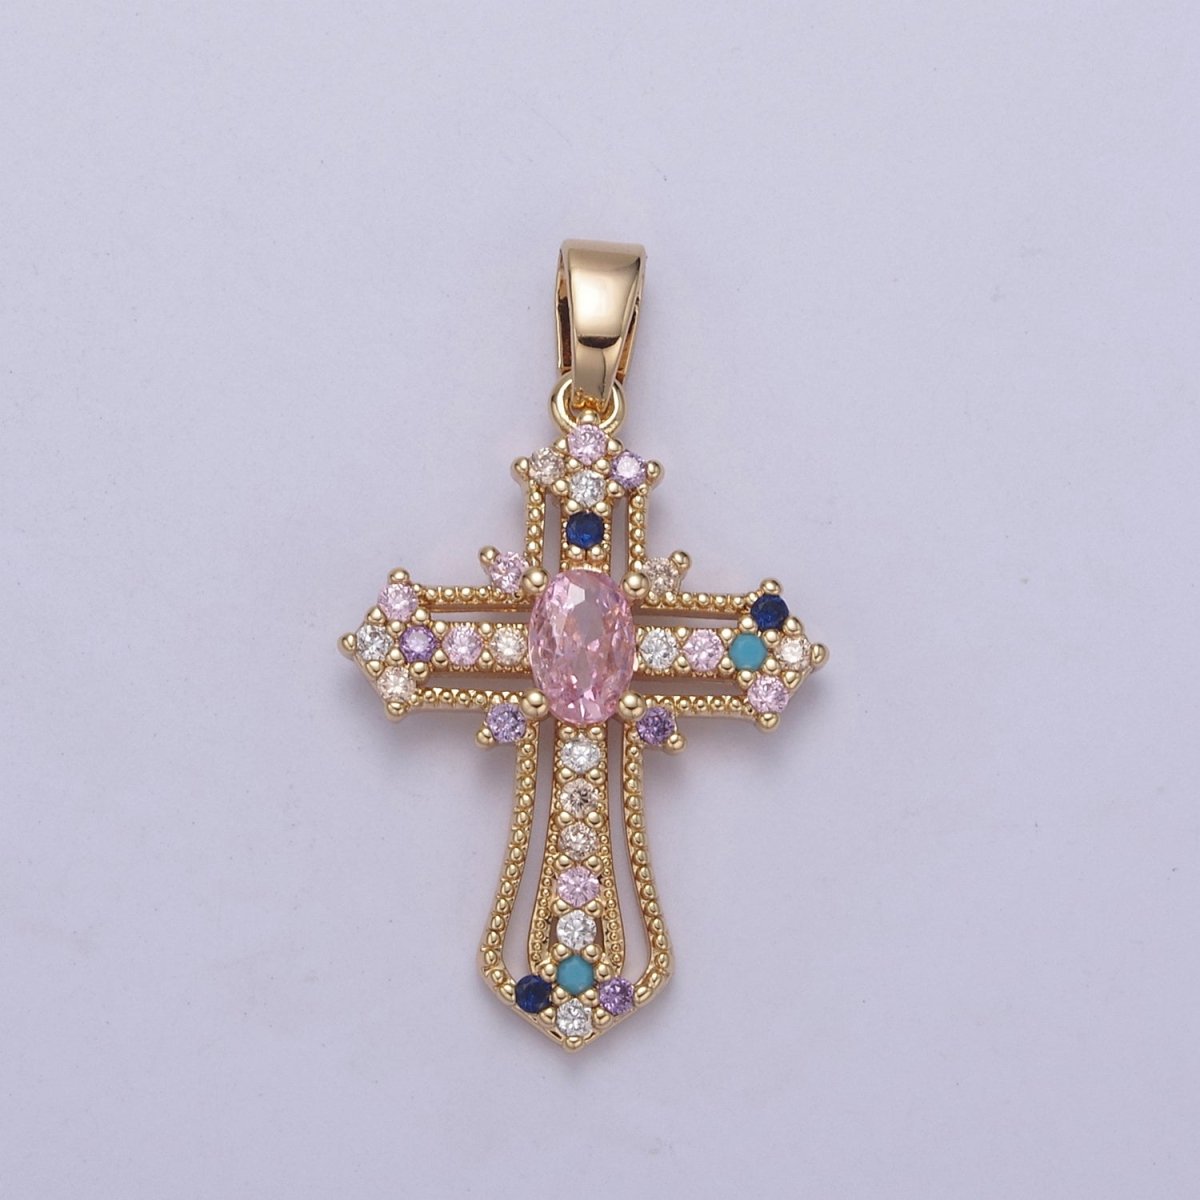 Beautiful Gold Filled CZ Cross Necklace Pendant Charm for Religious Christian Catholic Jewelry Making H-411 H-412 - DLUXCA